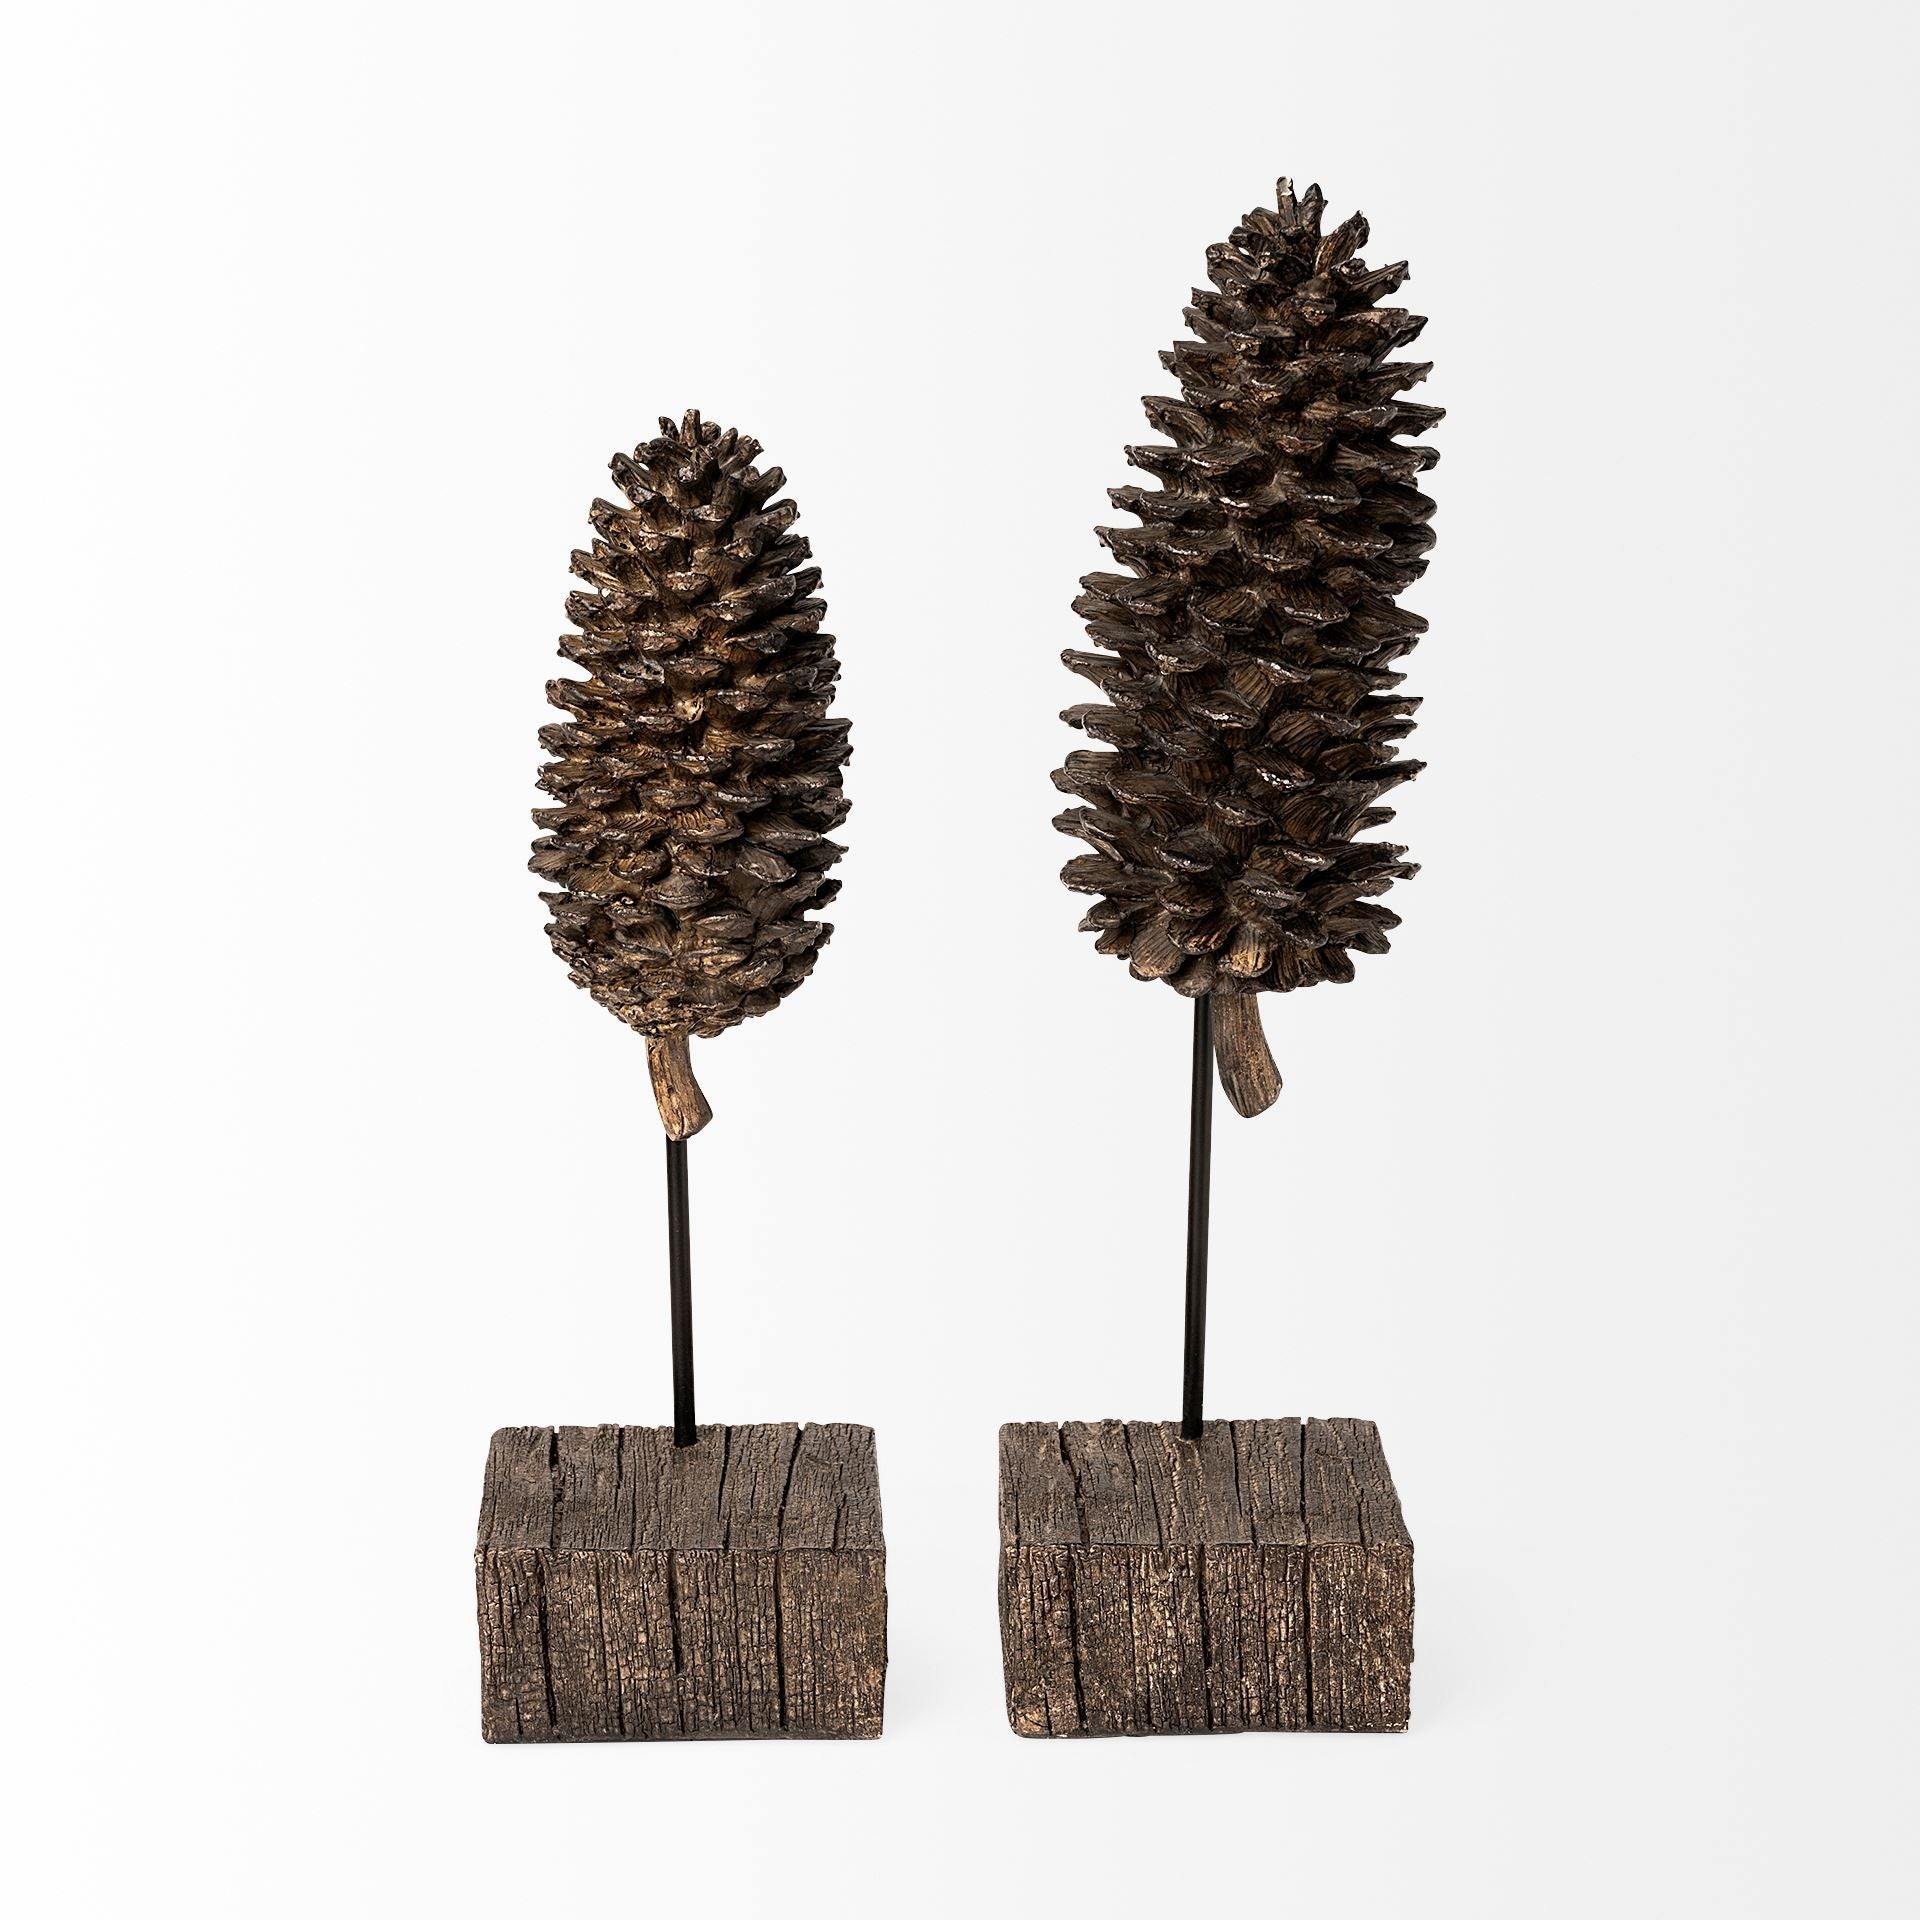 Brown Resin Pinecone Shaped Sculpture